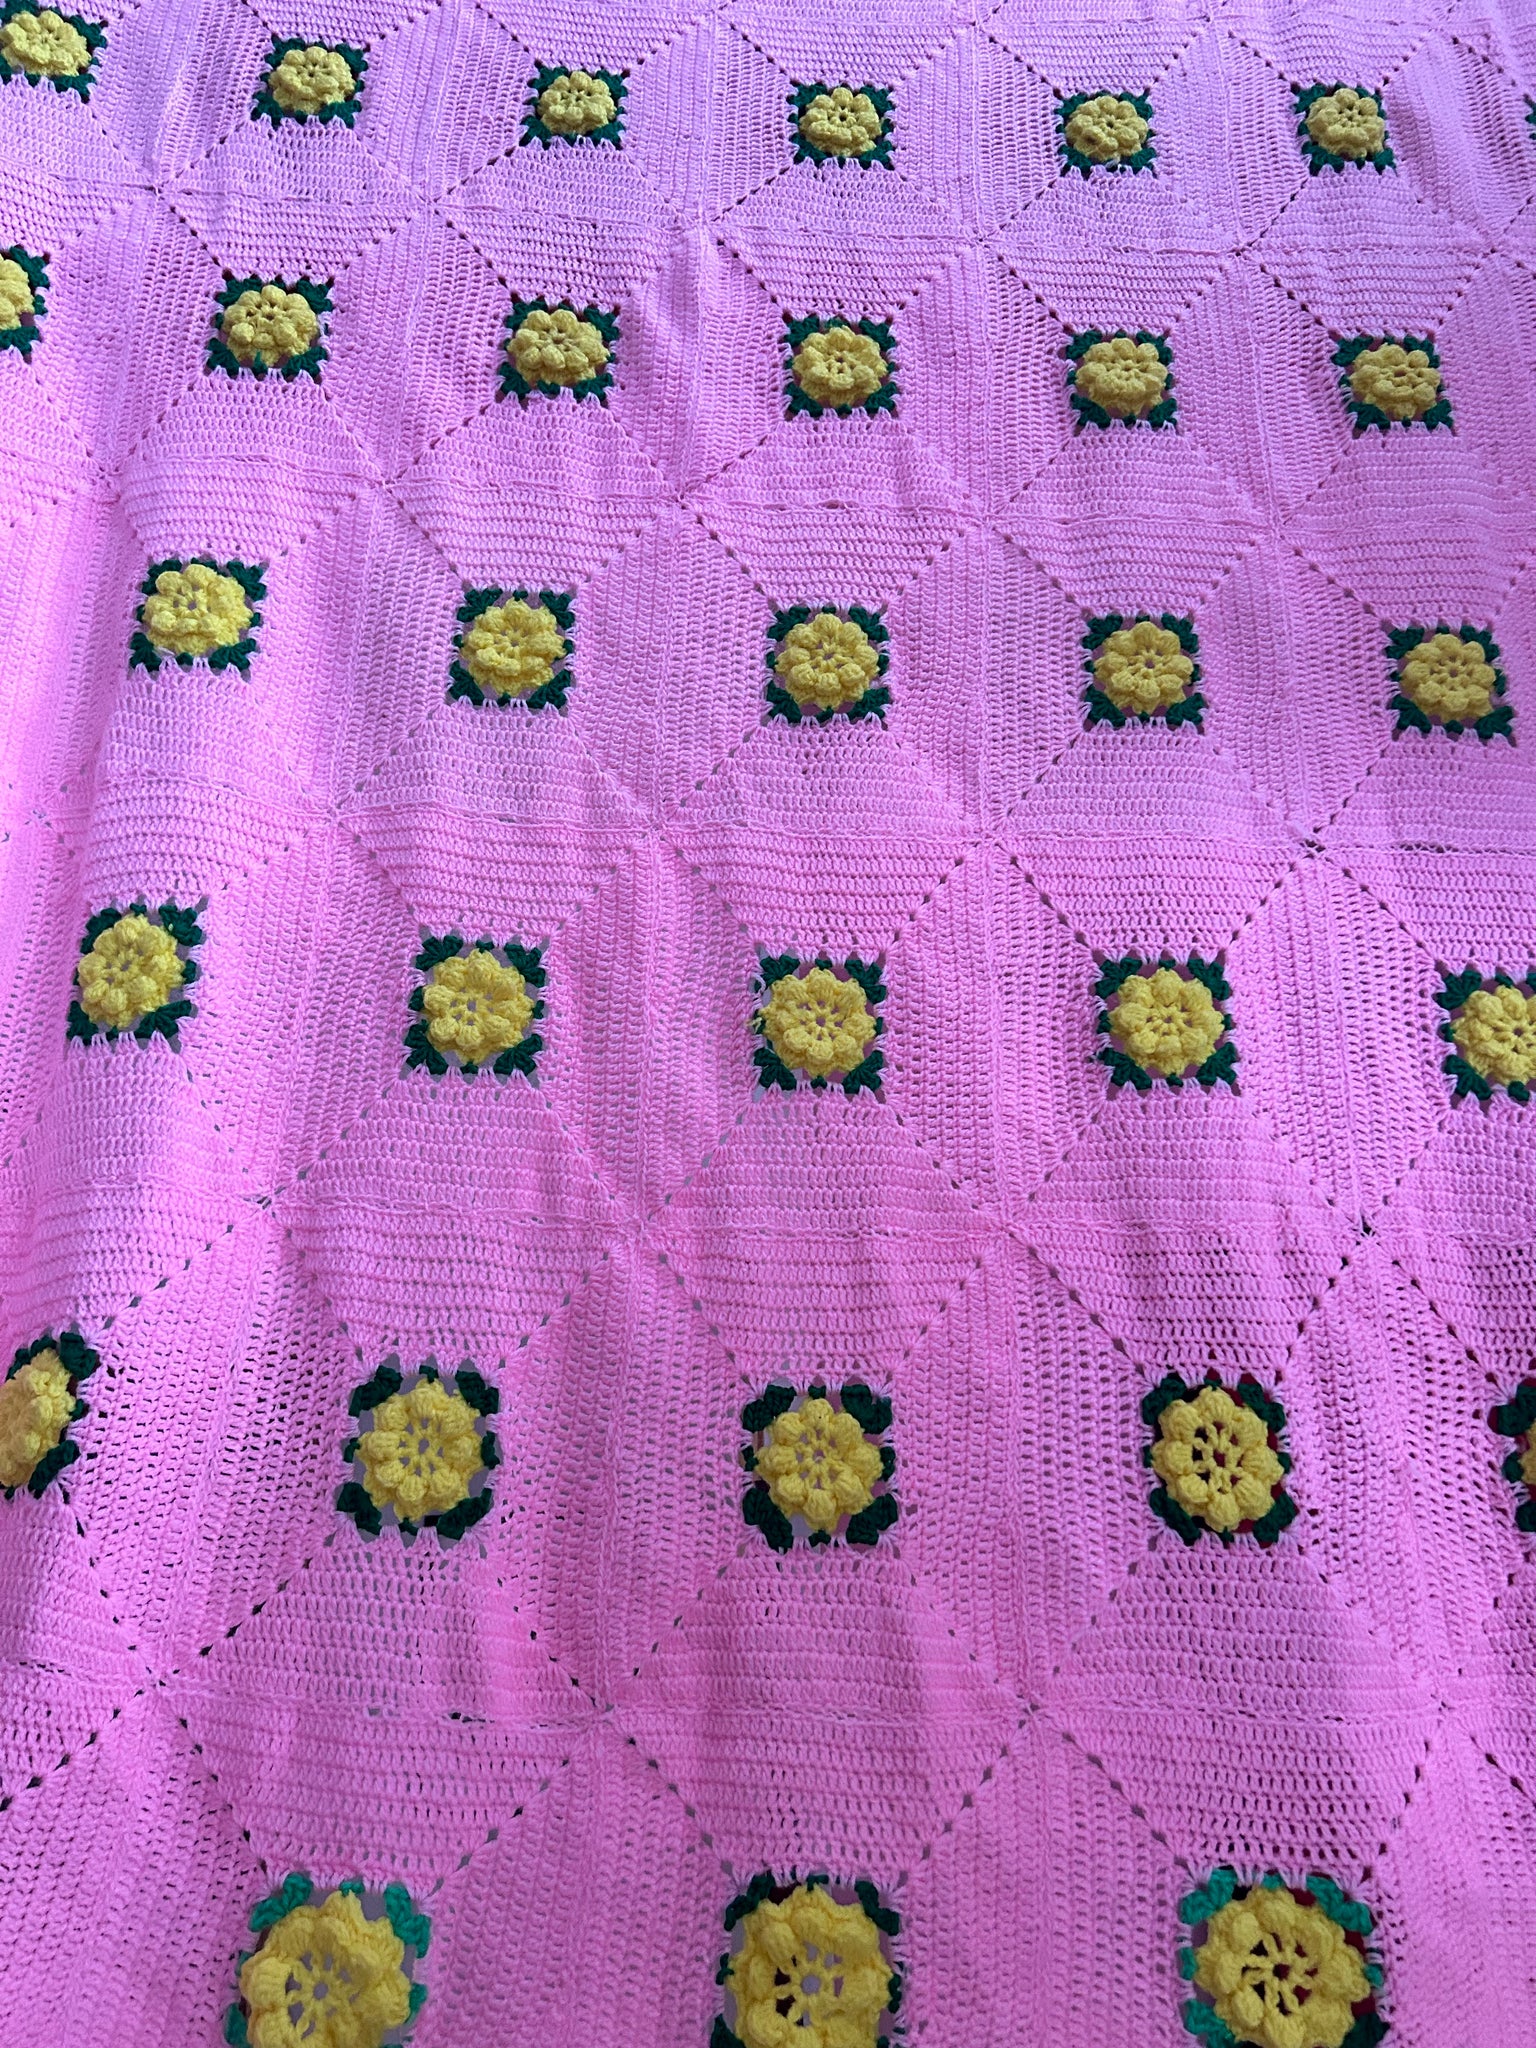 Pink hand knitted blanket with yellow crochet flowers